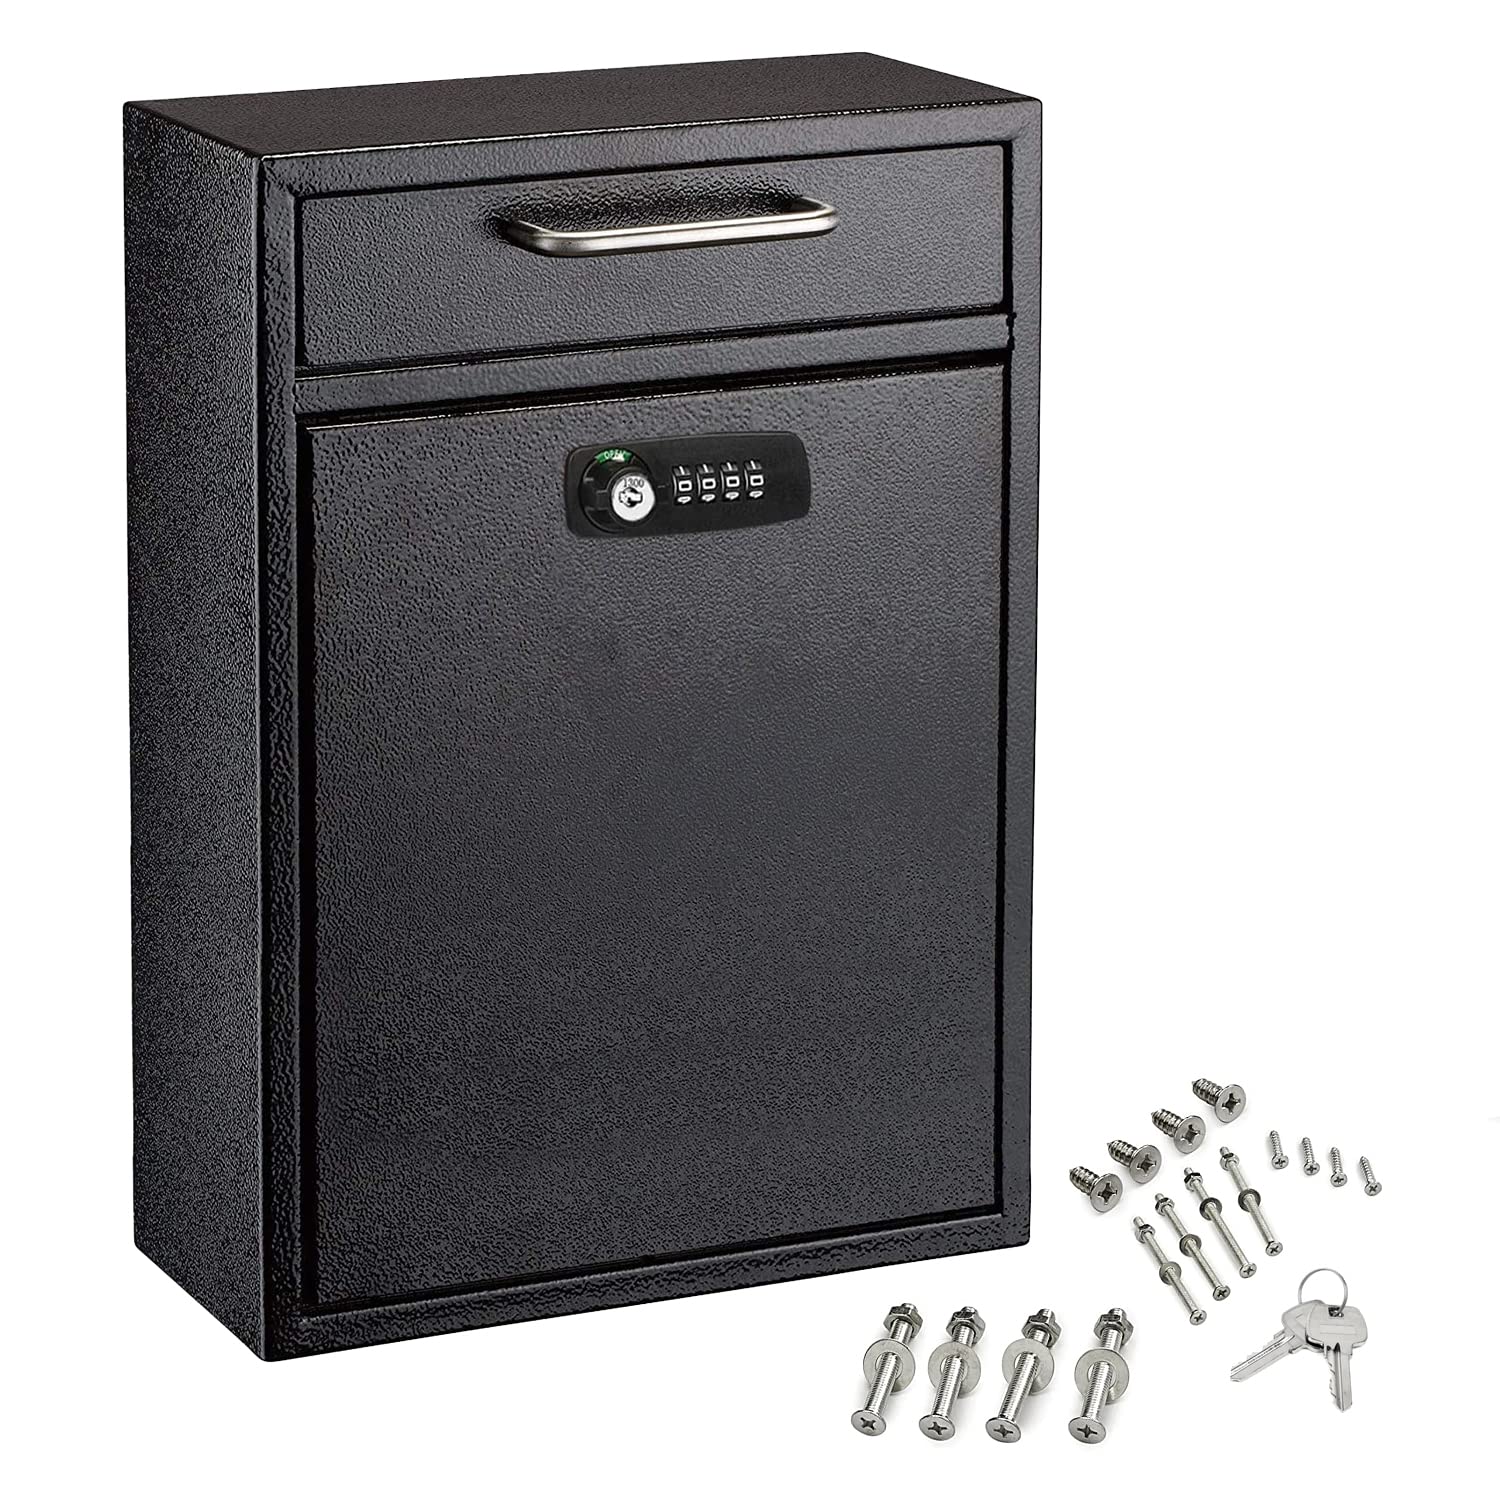 AdirOffice Ultimate Drop Box Wall-Mounted Mailbox - Hanging Secured Postbox - Durable Spacious Key or Combination Lock Box Perfect for After Hours Deposits Payments Key and Letter Drops  - Good